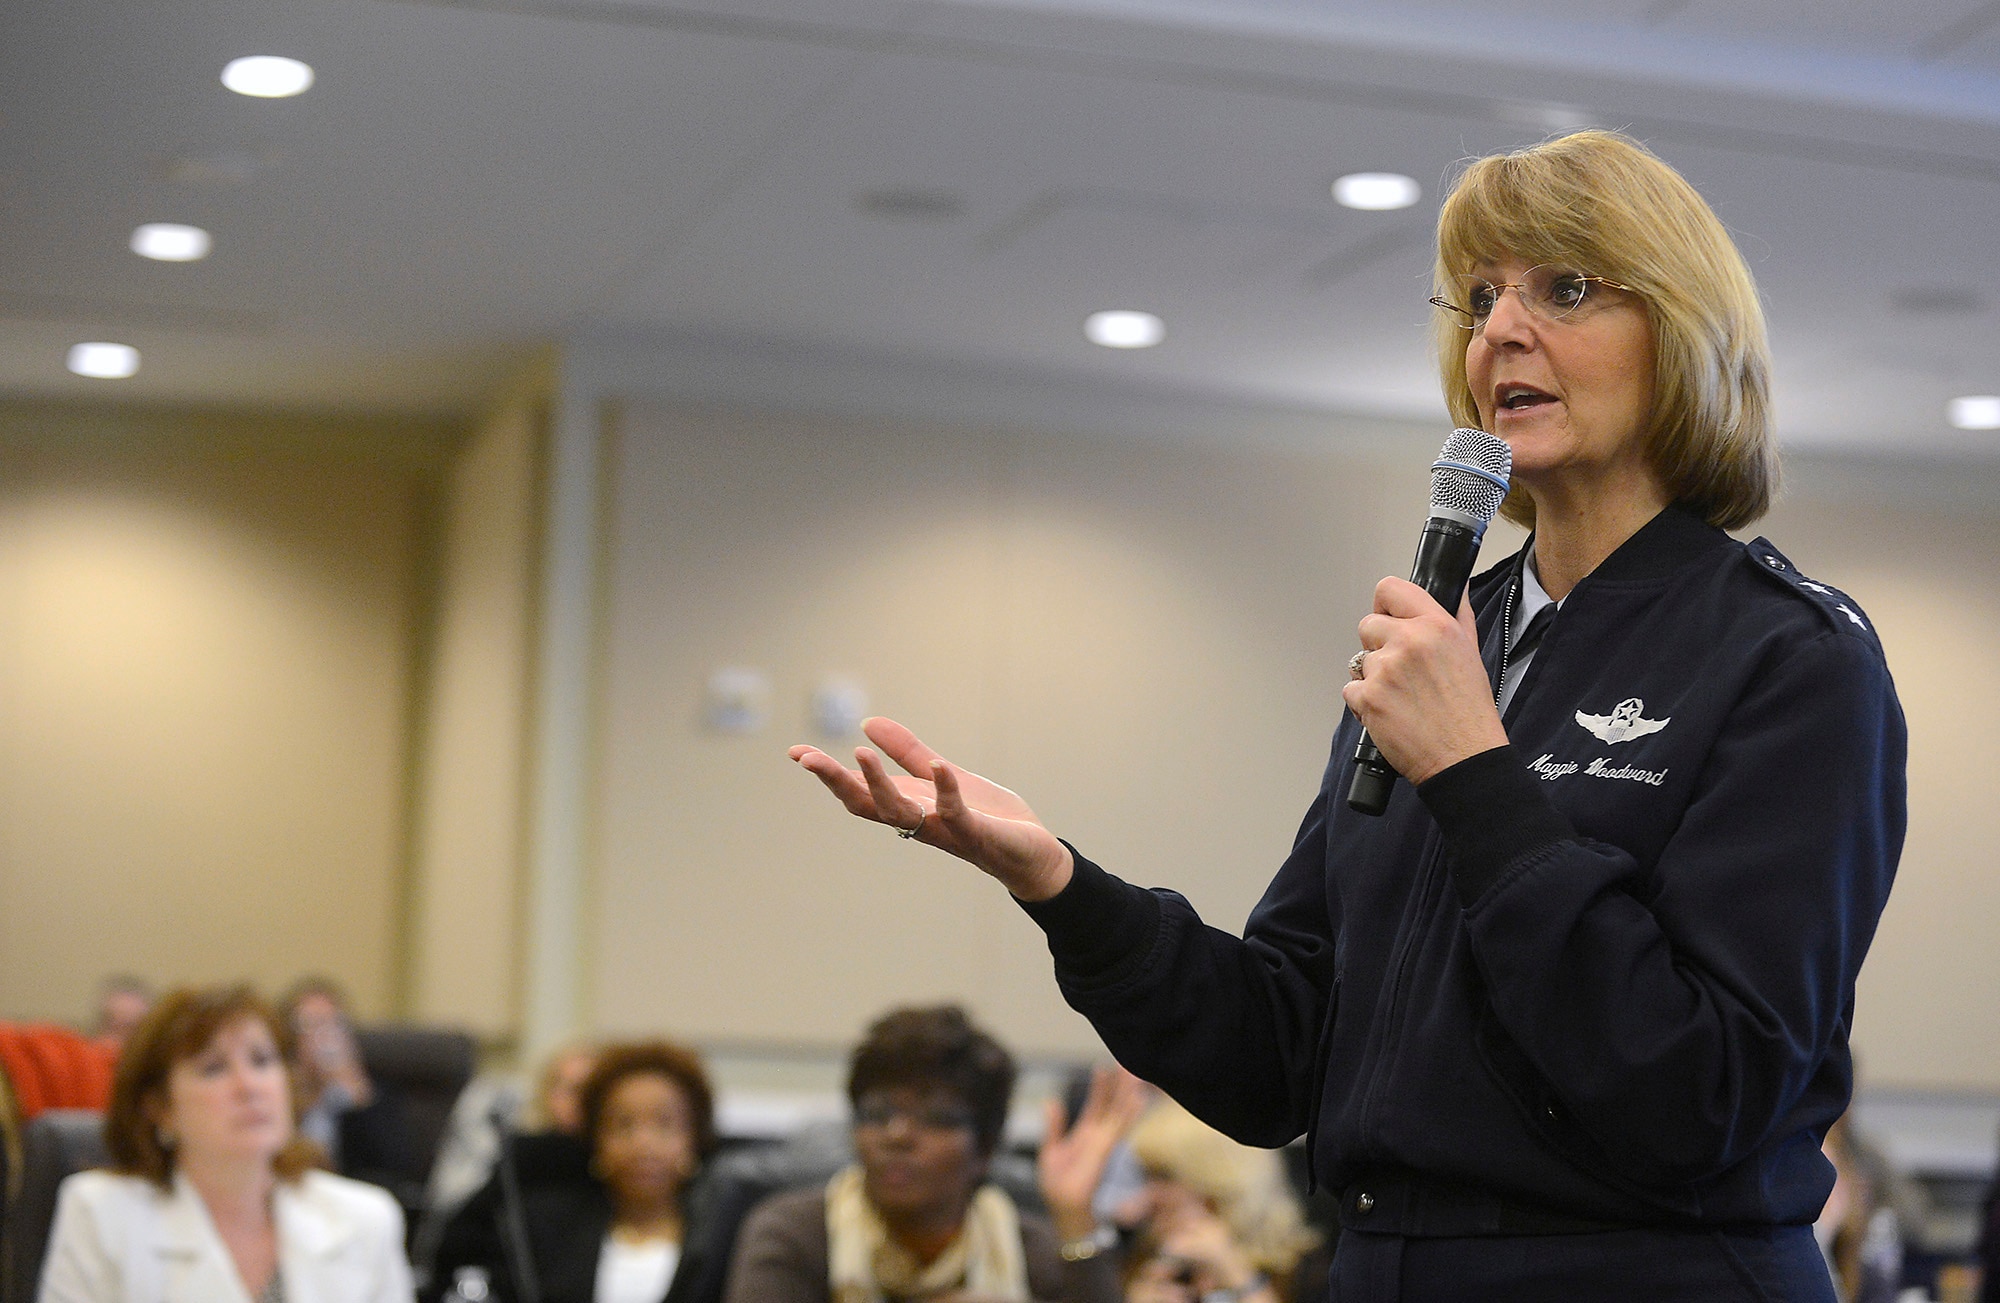 Maj. Gen. Margaret H. Woodward, director of the Air Force Sexual Assault Prevention and Response office, talks with sexual assault response coordinators during the SAPR summit, hosted by Air Force Chief of Staff Gen. Mark A. Welsh III, at Joint Base Andrews, Md., Dec. 12, 2013.  Wing commanders, command chiefs and sexual assault response coordinators from across the Air Force attended the two-day event, which included discussion from senior leaders, sexual assault victims and industry experts.  